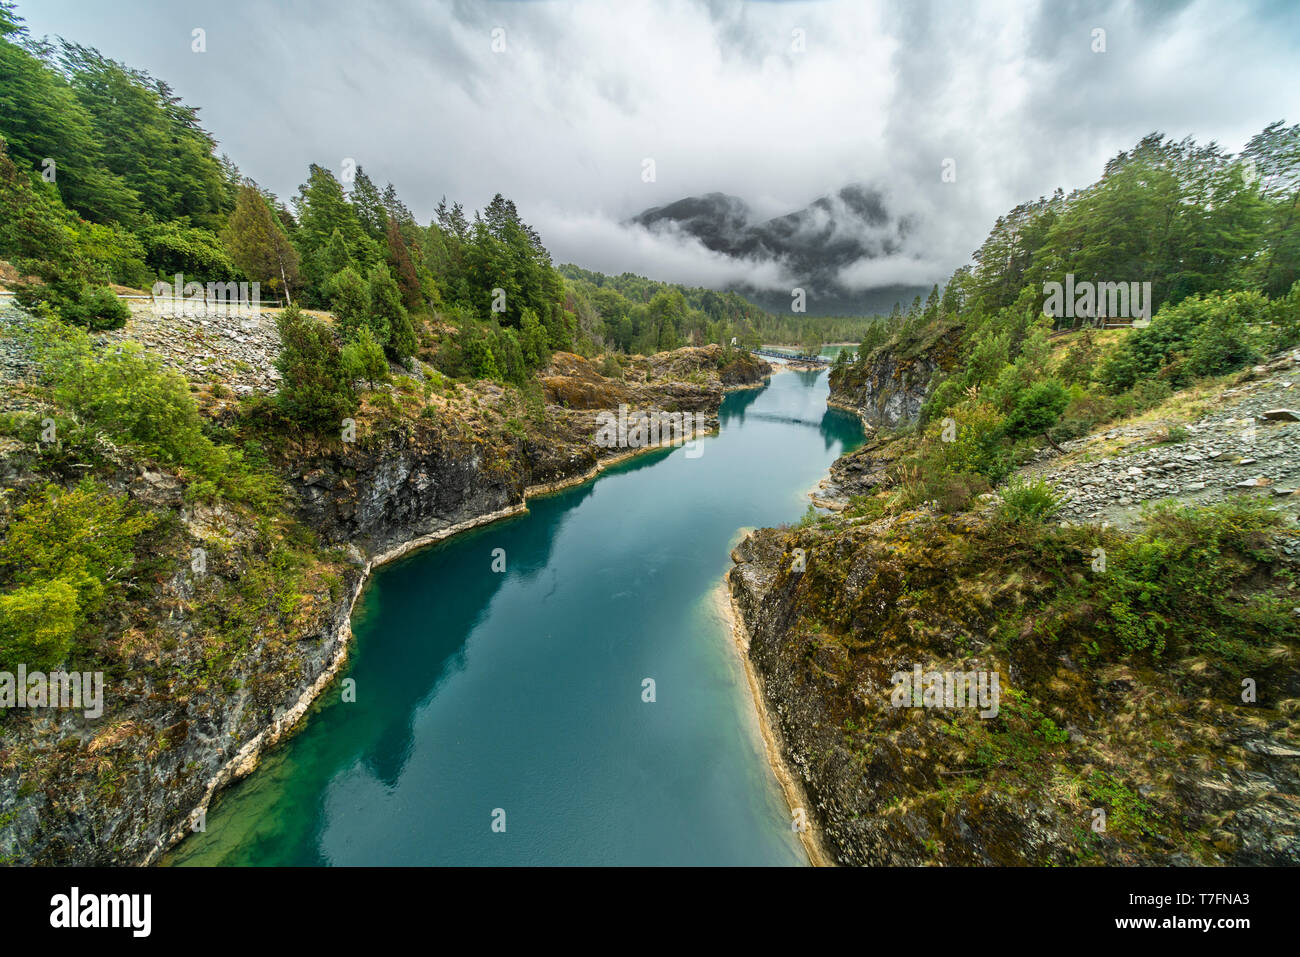 Awe hanging bridge at north Chilean Patagonia, Puelo river moves around the narrow gorge with its turquoise waters on an awe idyllic environment Stock Photo